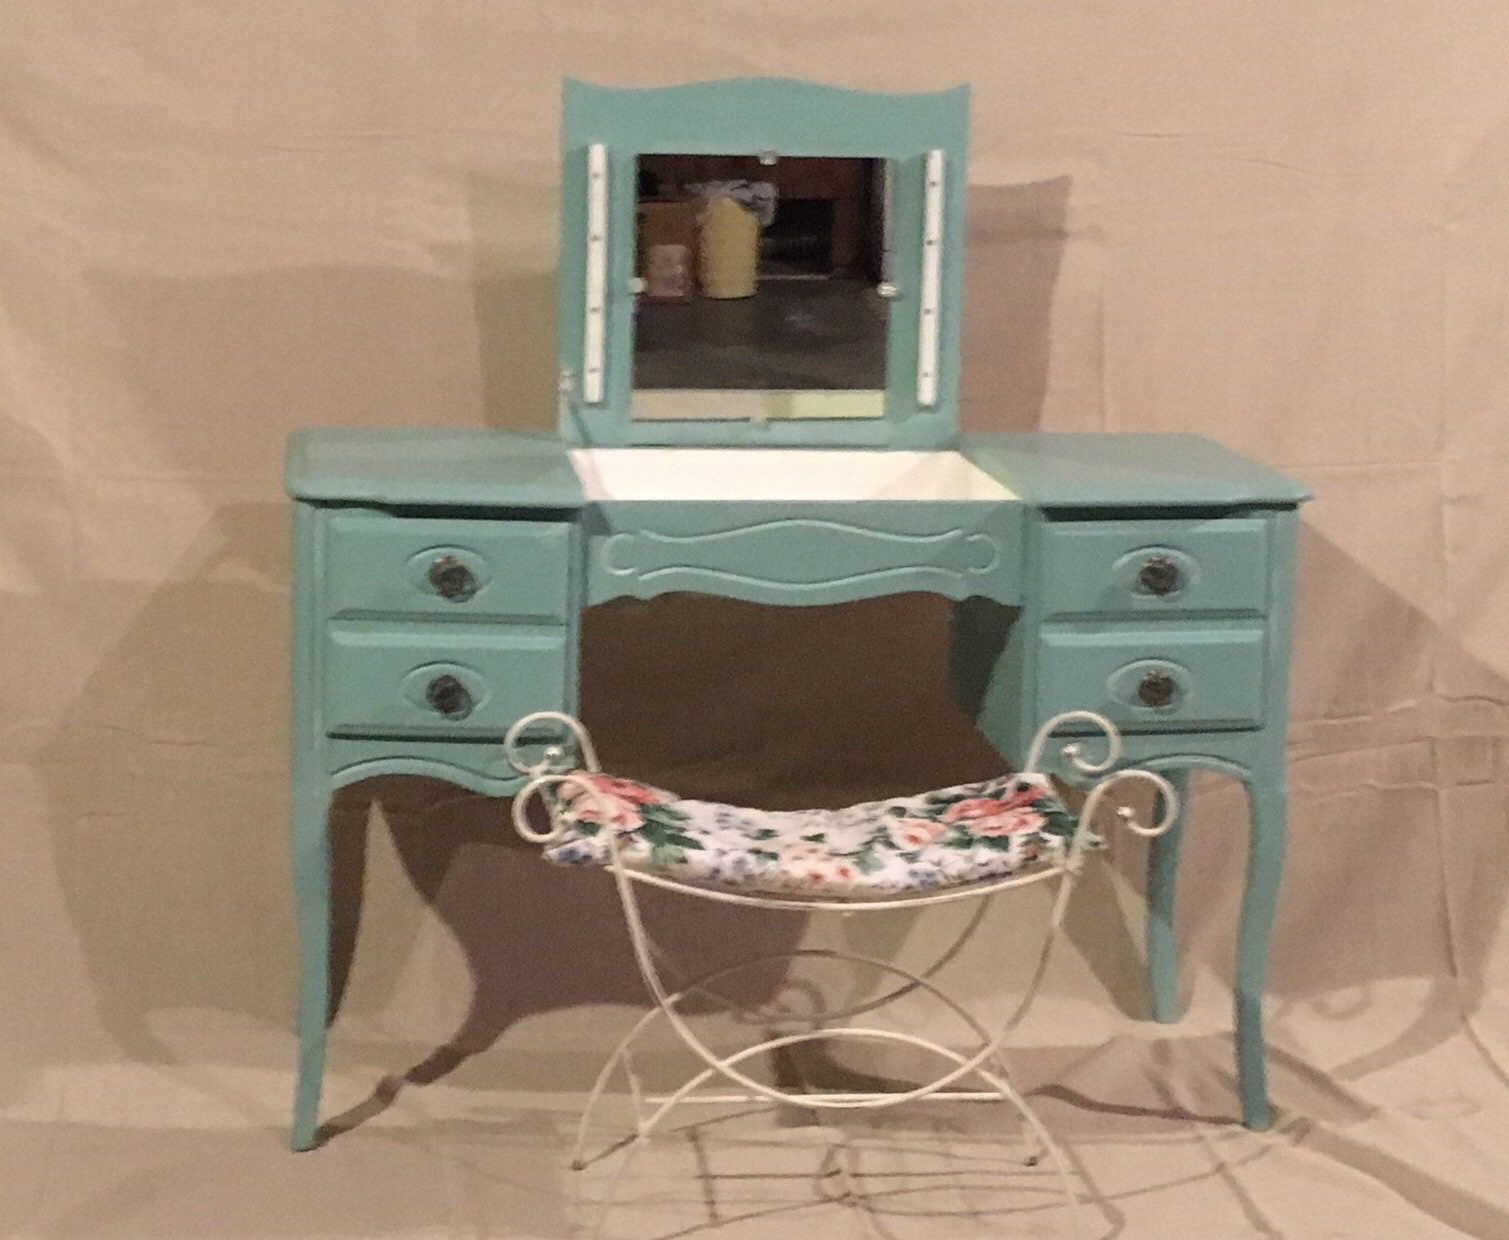 French Provincial Vanity table - writing Desk Robins egg blue